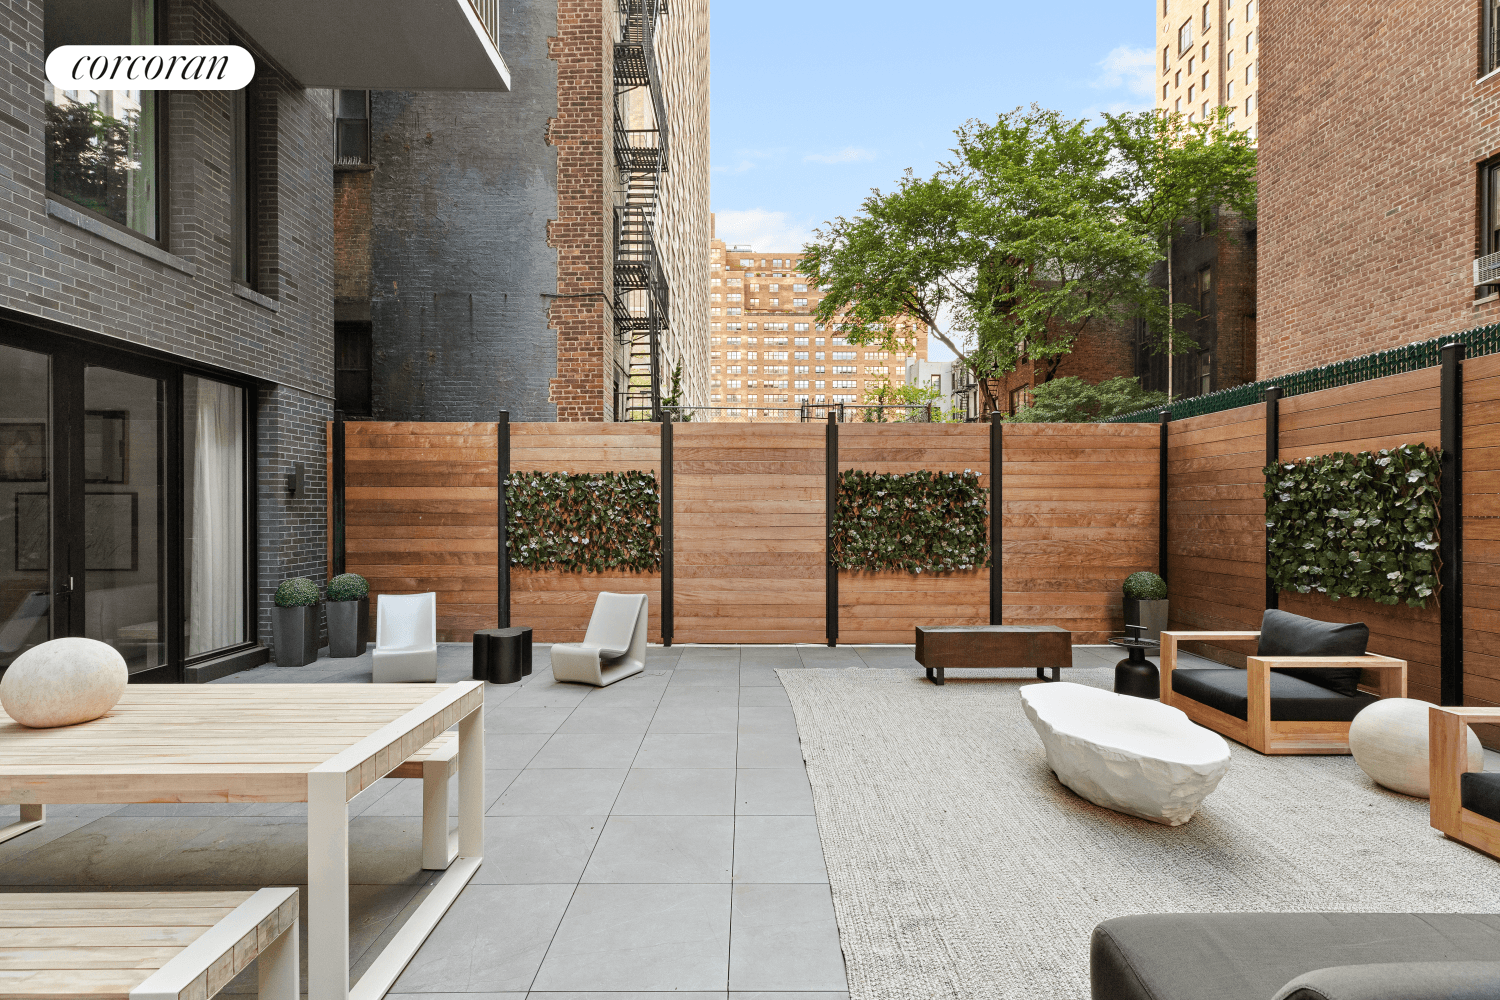 Maisonette at 323 East 79th StreetFour Bedrooms Three Baths Powder Room2, 670 Interior Square FeetPrivate Garden with 792 Exterior Square Feet323 E 79th Street offers a blend of contemporary elegance ...